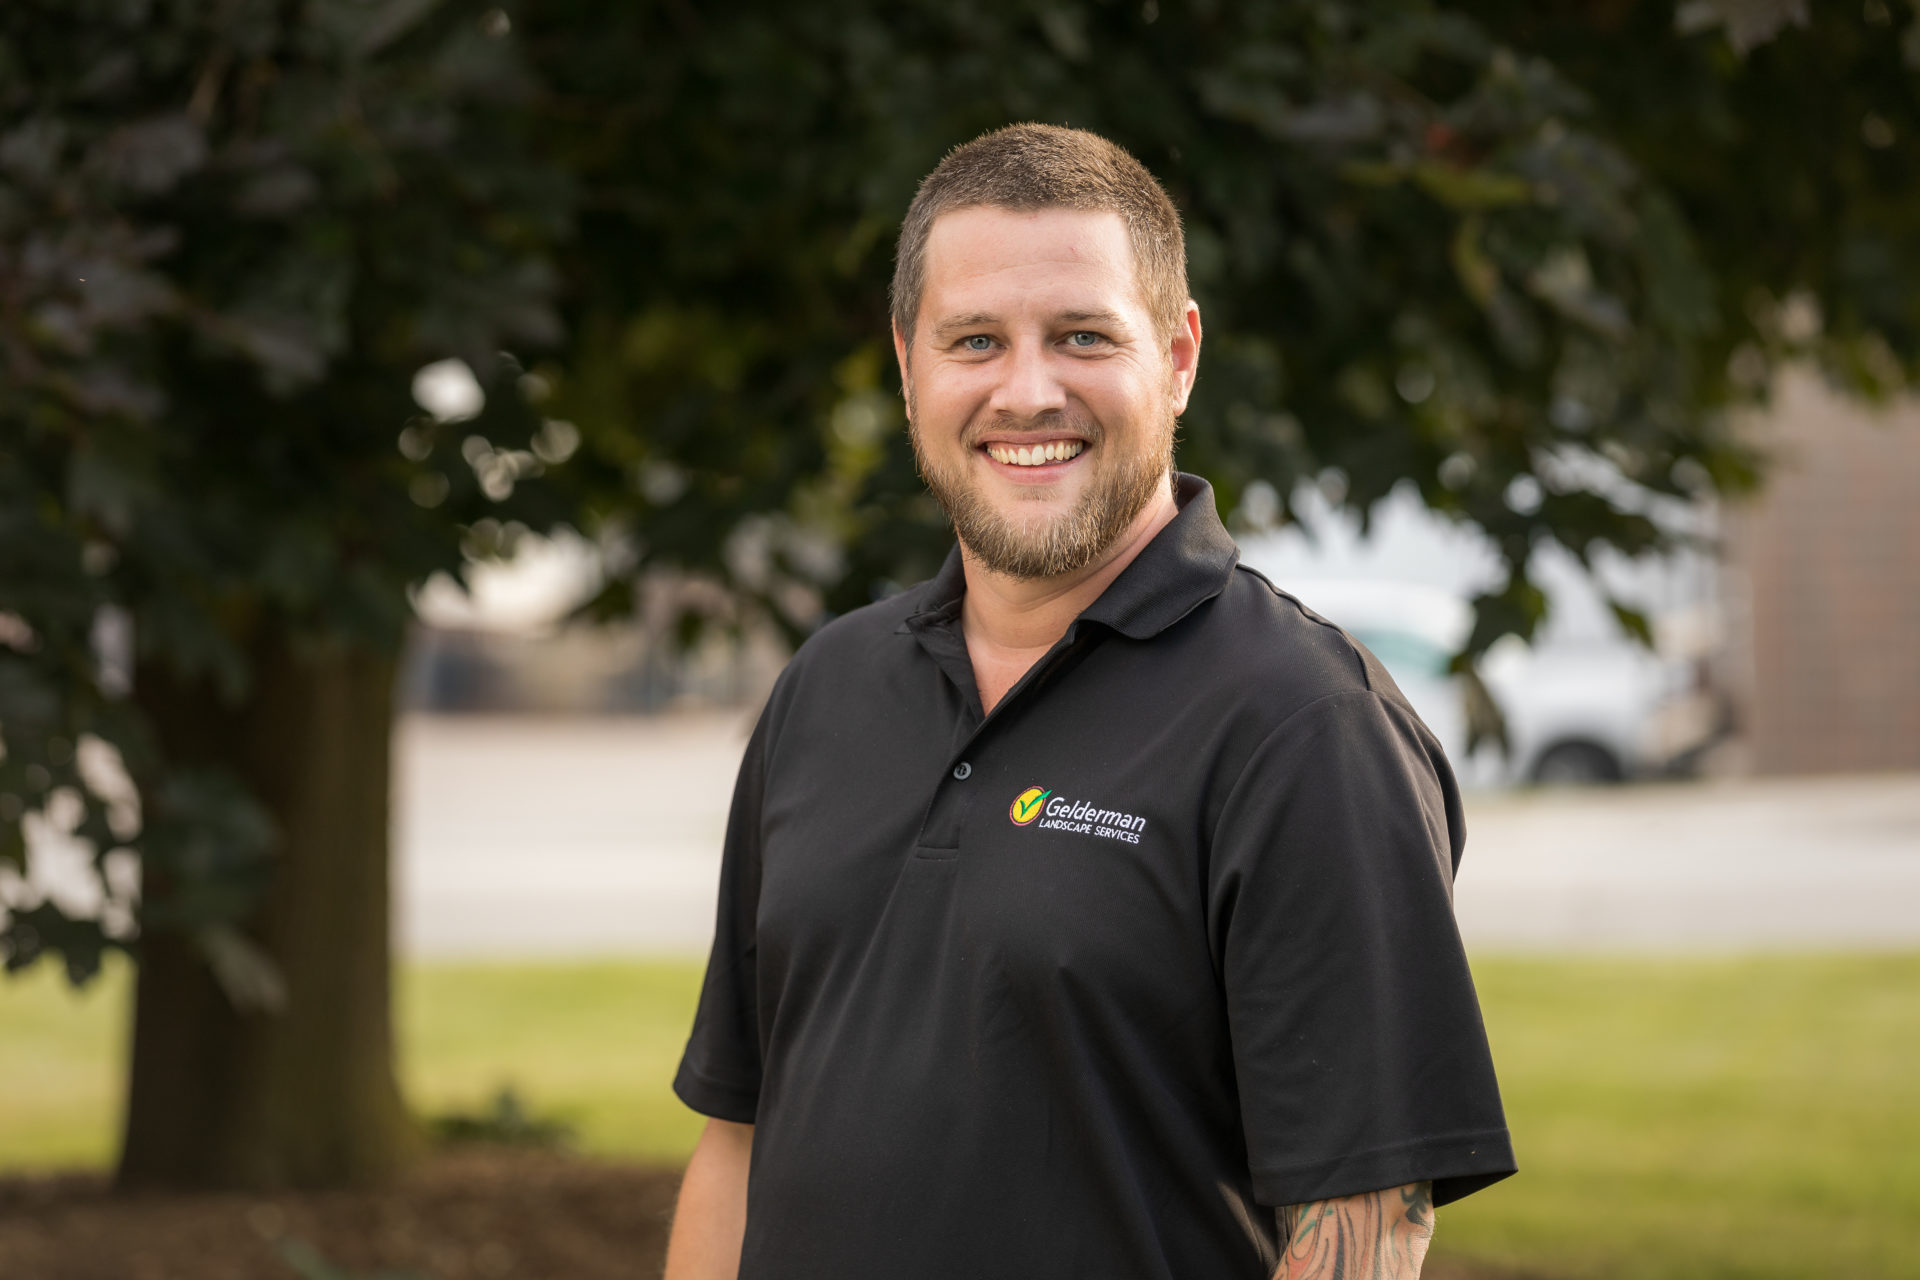 Brox Rogers joined the company and is now the current Waterloo Branch Manager.